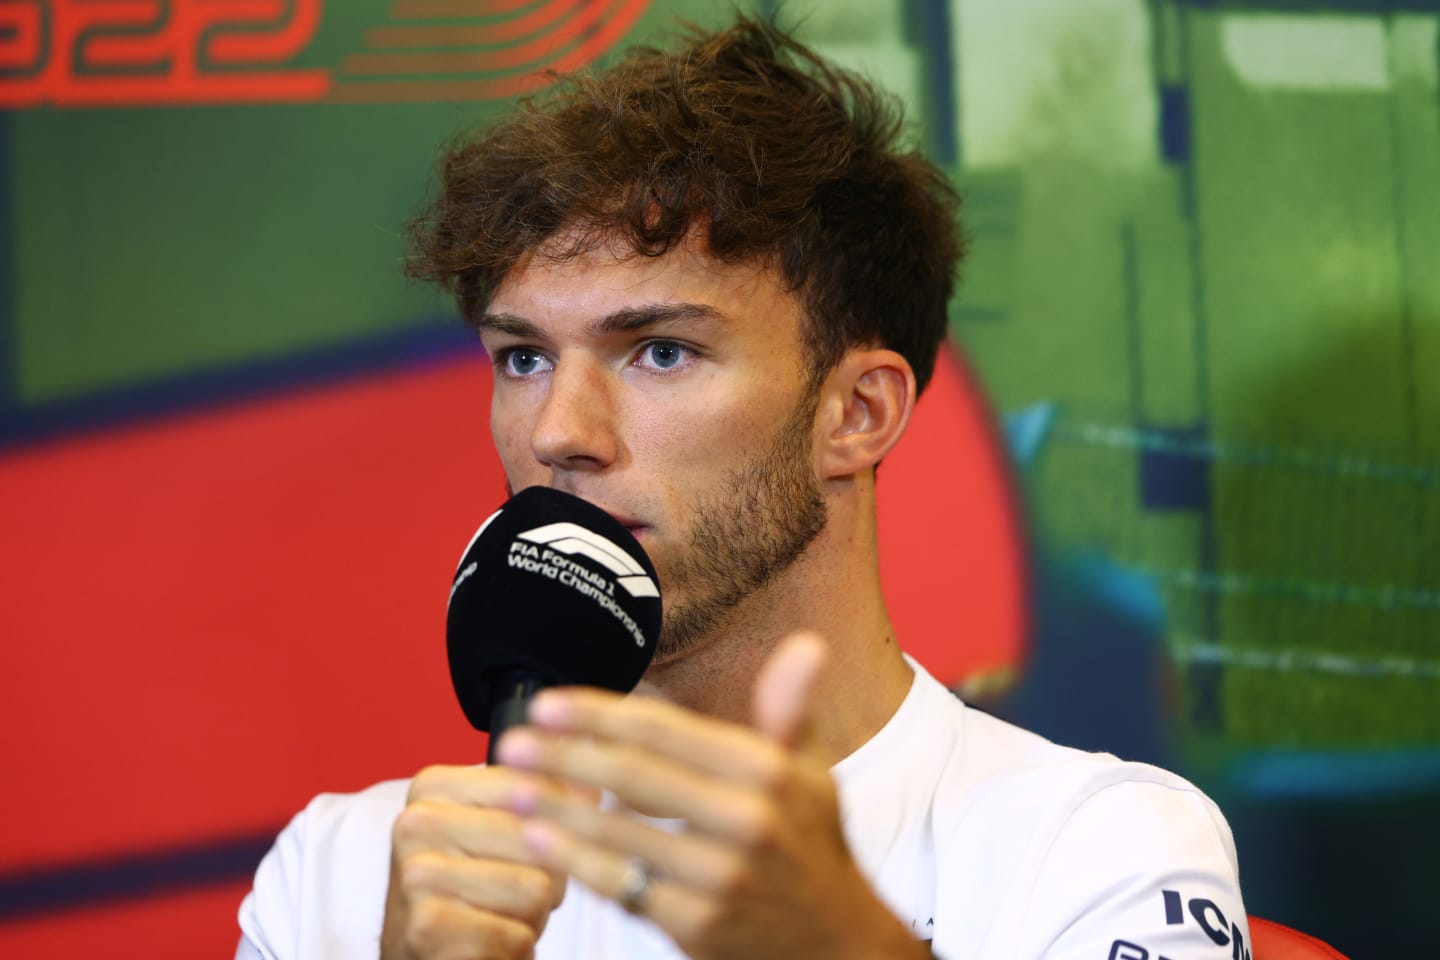 BAKU, AZERBAIJAN - JUNE 10: Pierre Gasly of France and Scuderia AlphaTauri talks in the Drivers Press Conference prior to practice ahead of the F1 Grand Prix of Azerbaijan at Baku City Circuit on June 10, 2022 in Baku, Azerbaijan. (Photo by Clive Rose/Getty Images)